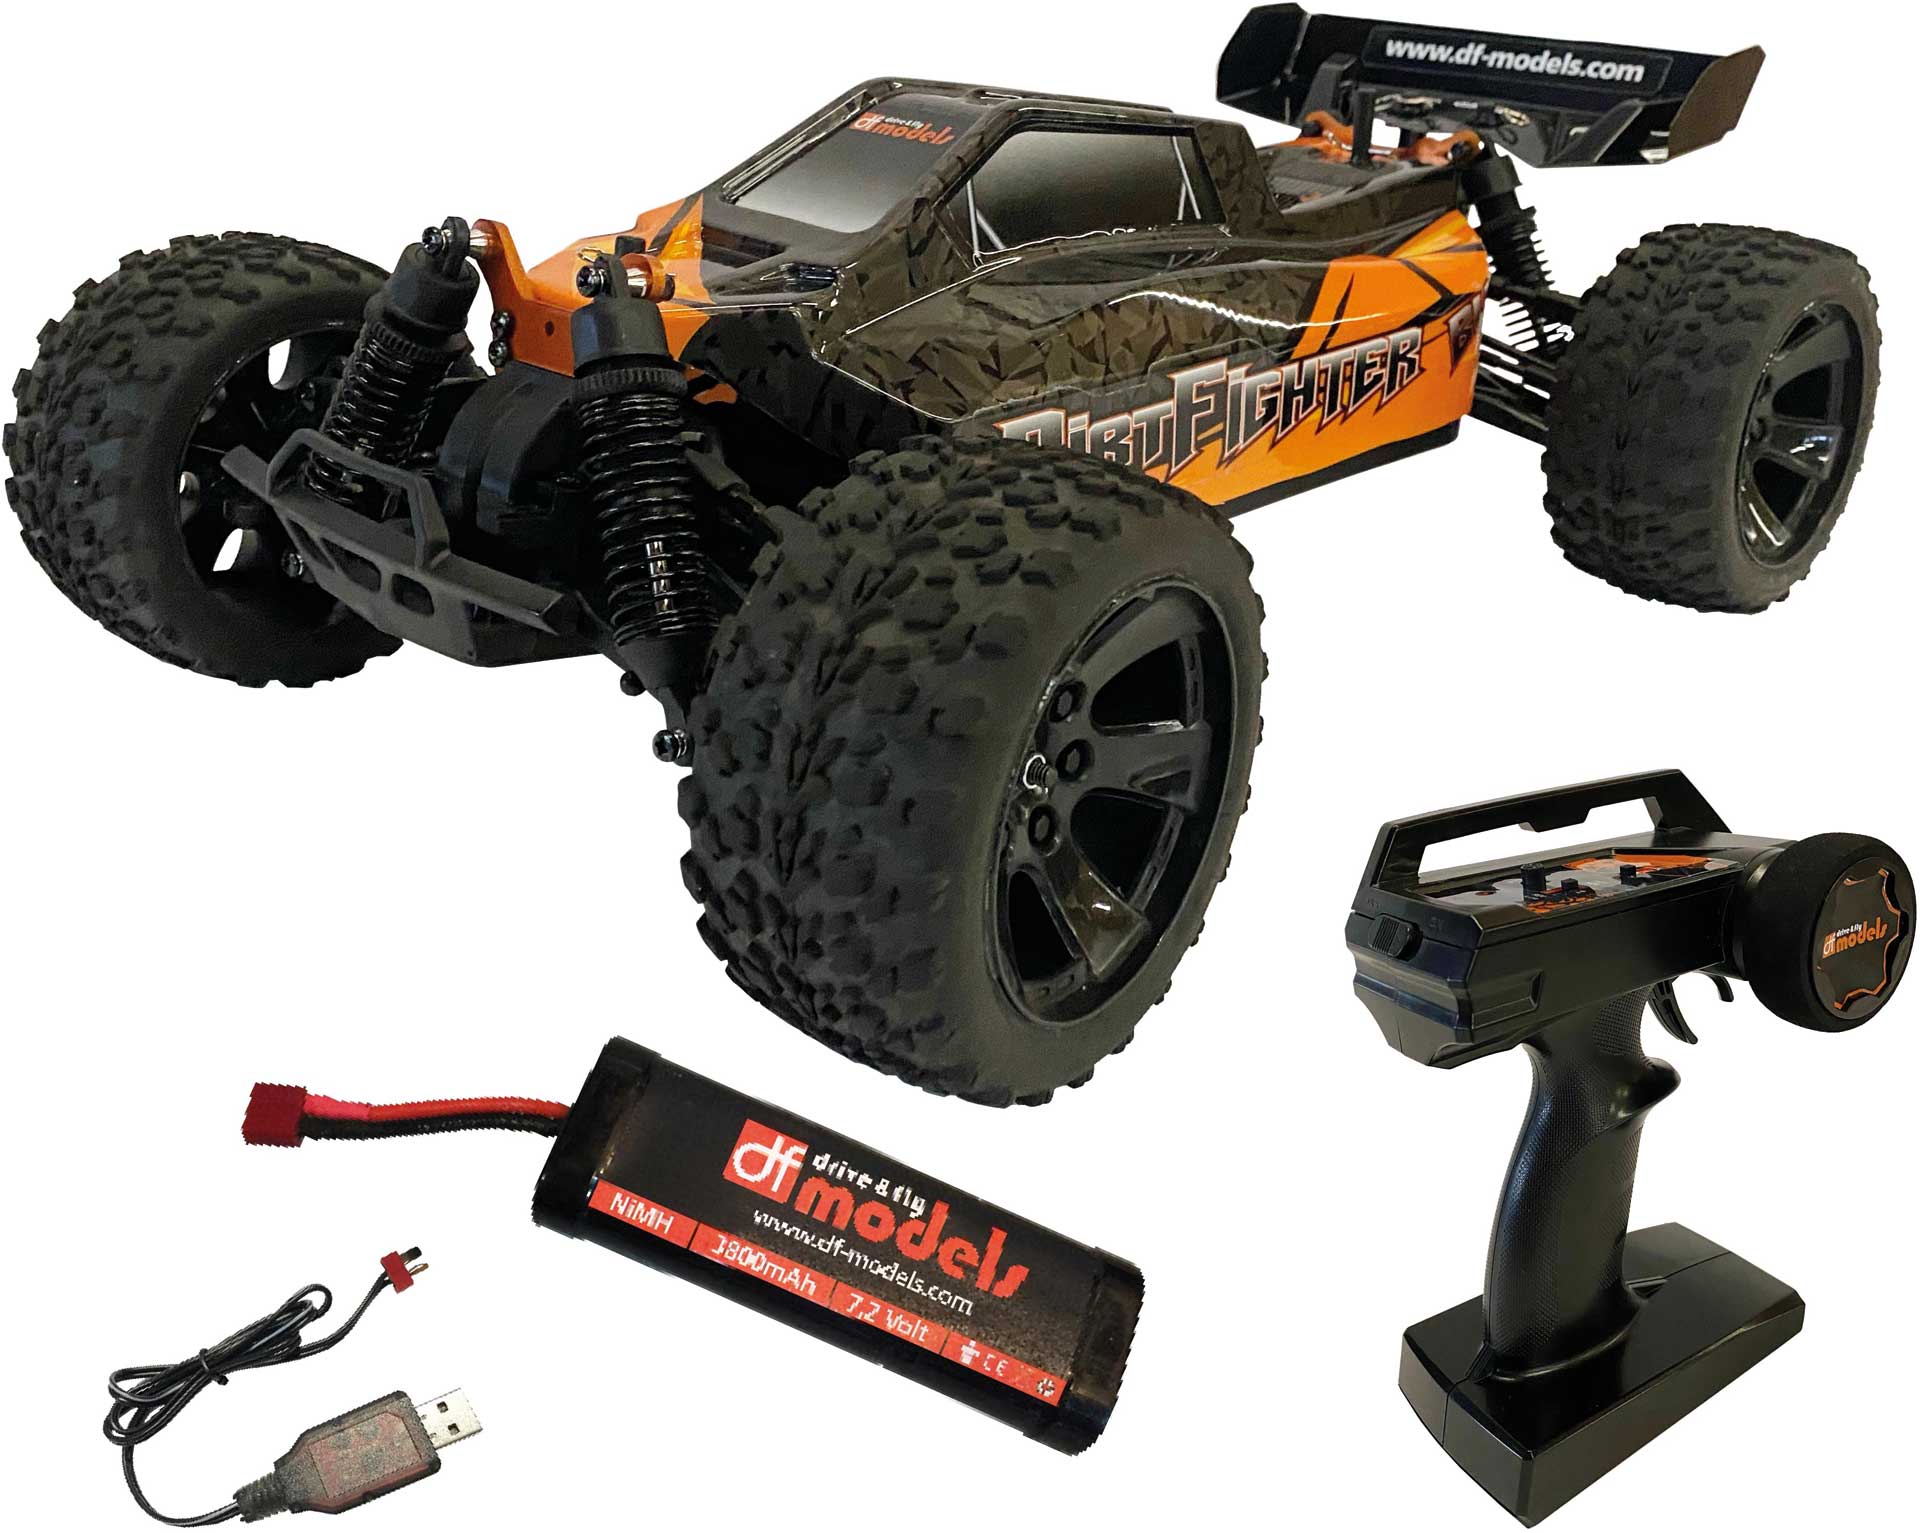 DRIVE & FLY MODELS DirtFighter BY RTR Buggy 4WD 1:10 RTR